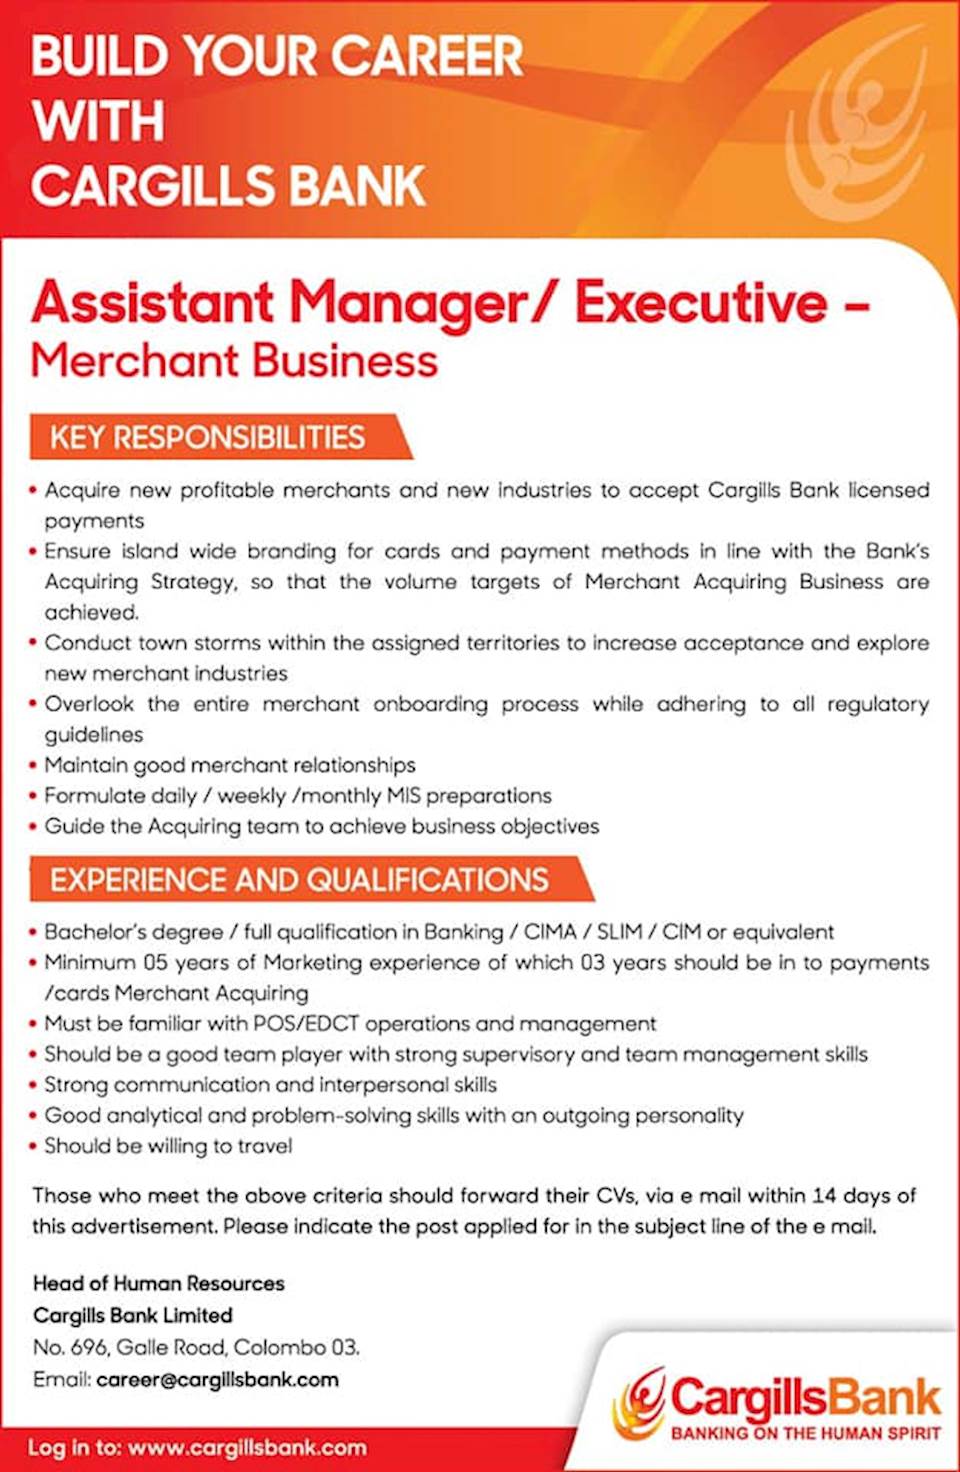 Assistant Manager / Executive - Merchant Business